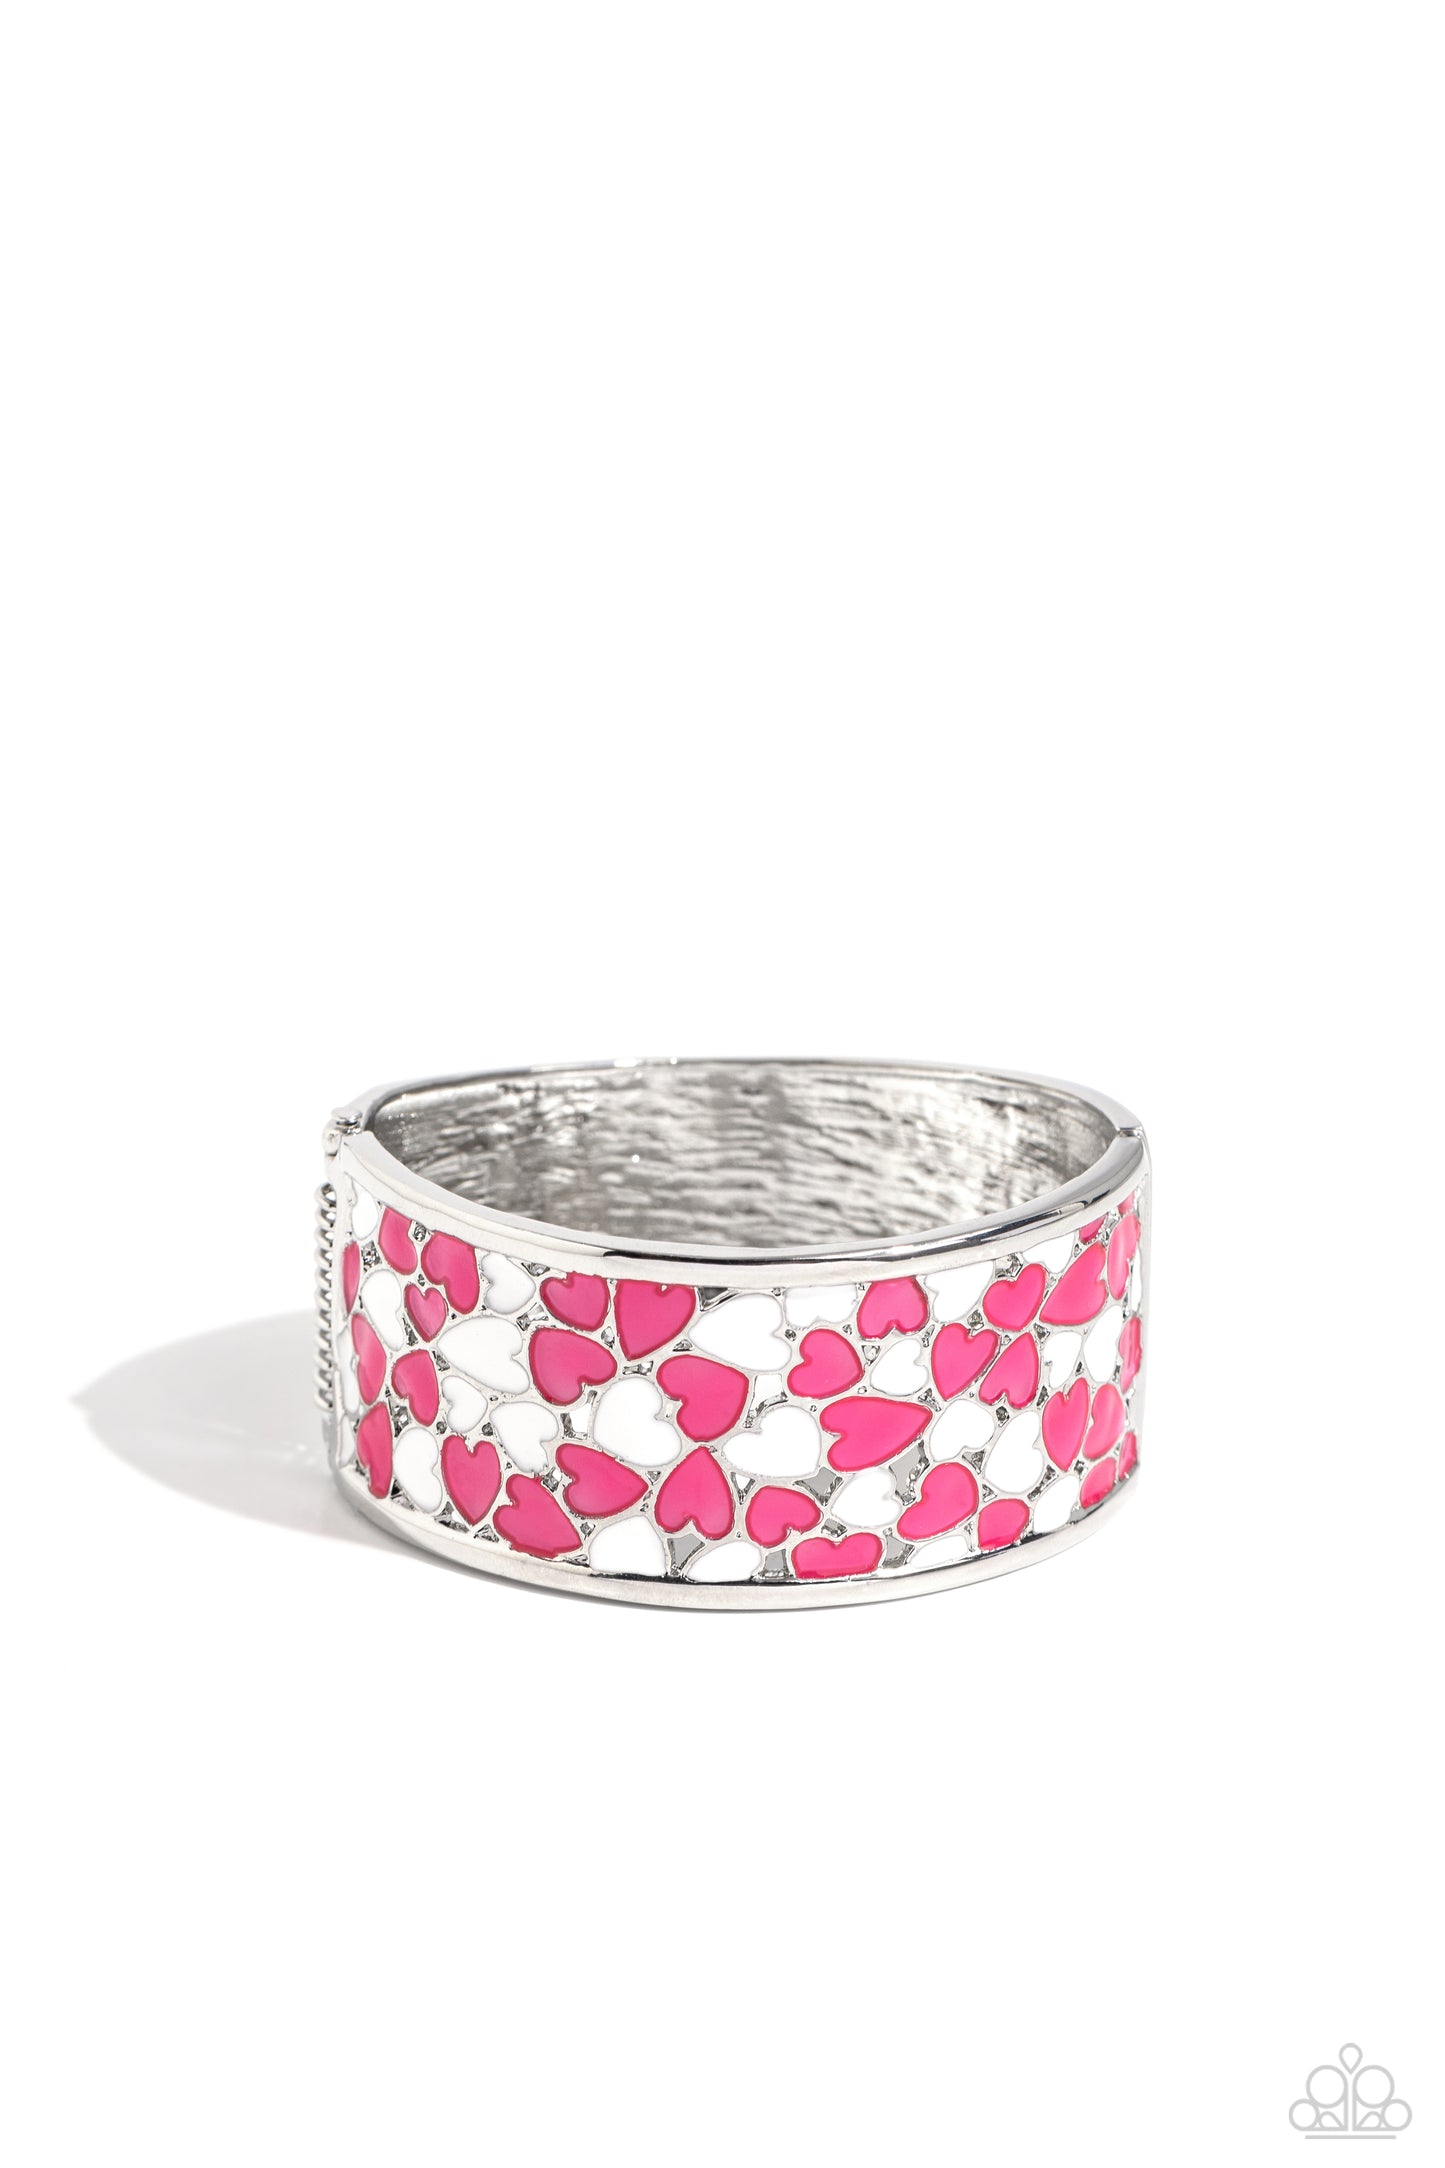 Penchant for Patterns Pink Heart Hinge Bracelet - Paparazzi Accessories  A wide silver band, hammered with subtle texture, is sprinkled with a collection of hot pink and white-painted hearts, creating a fun-loving display around the wrist. Features a hinged closure.  Sold as one individual bracelet.  SKU: P9WH-PKXX-332XX